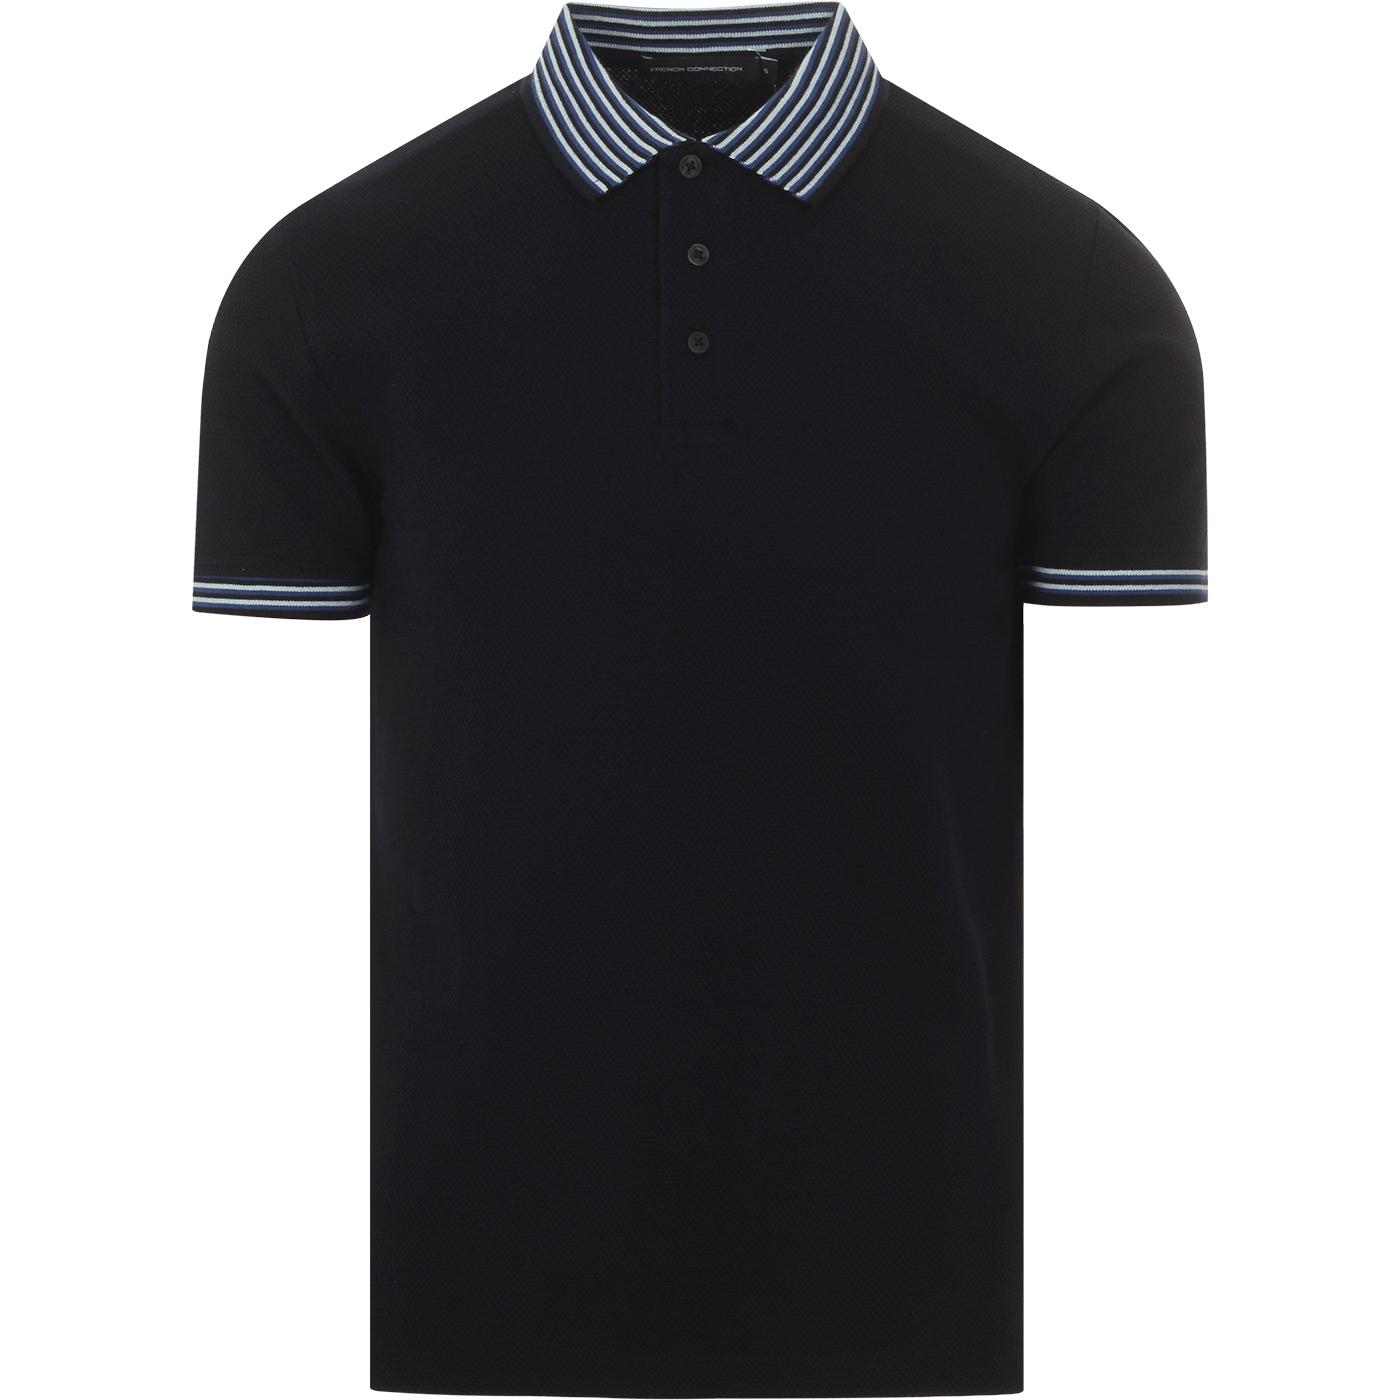 FRENCH CONNECTION Retro Mod Popcorn Jersey Polo Top